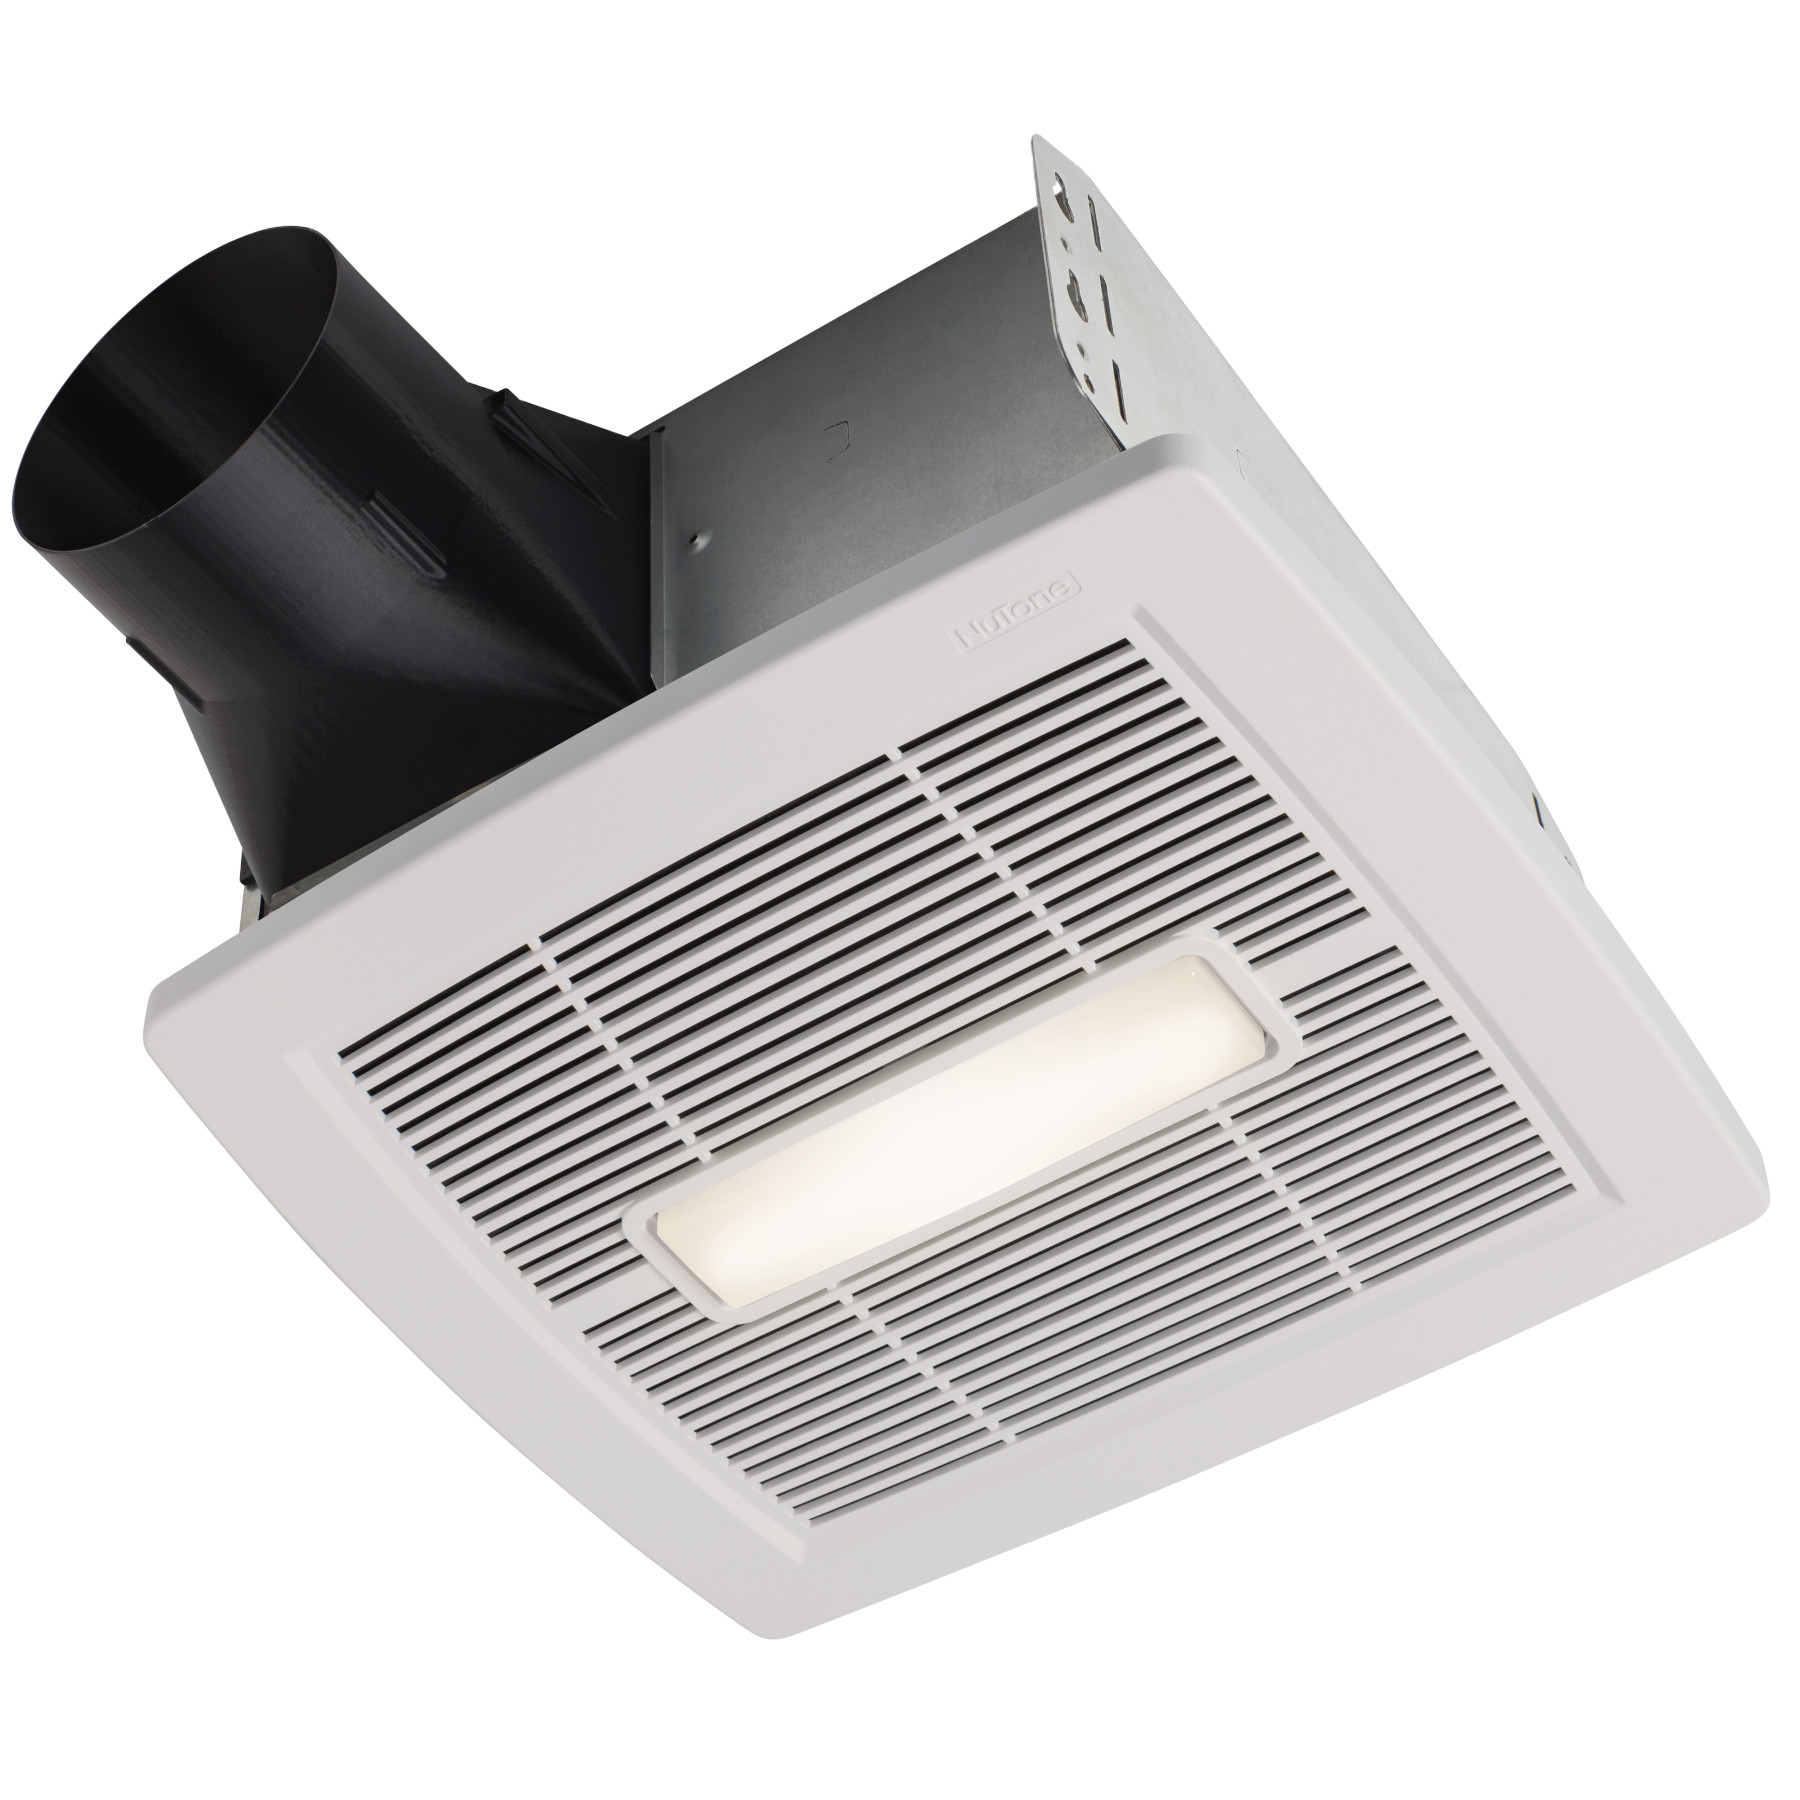 **DISCONTINUED** Flex Series 110 CFM Ceiling Roomside Installation Bathroom Exhaust Fan with Light, ENERGY STAR*